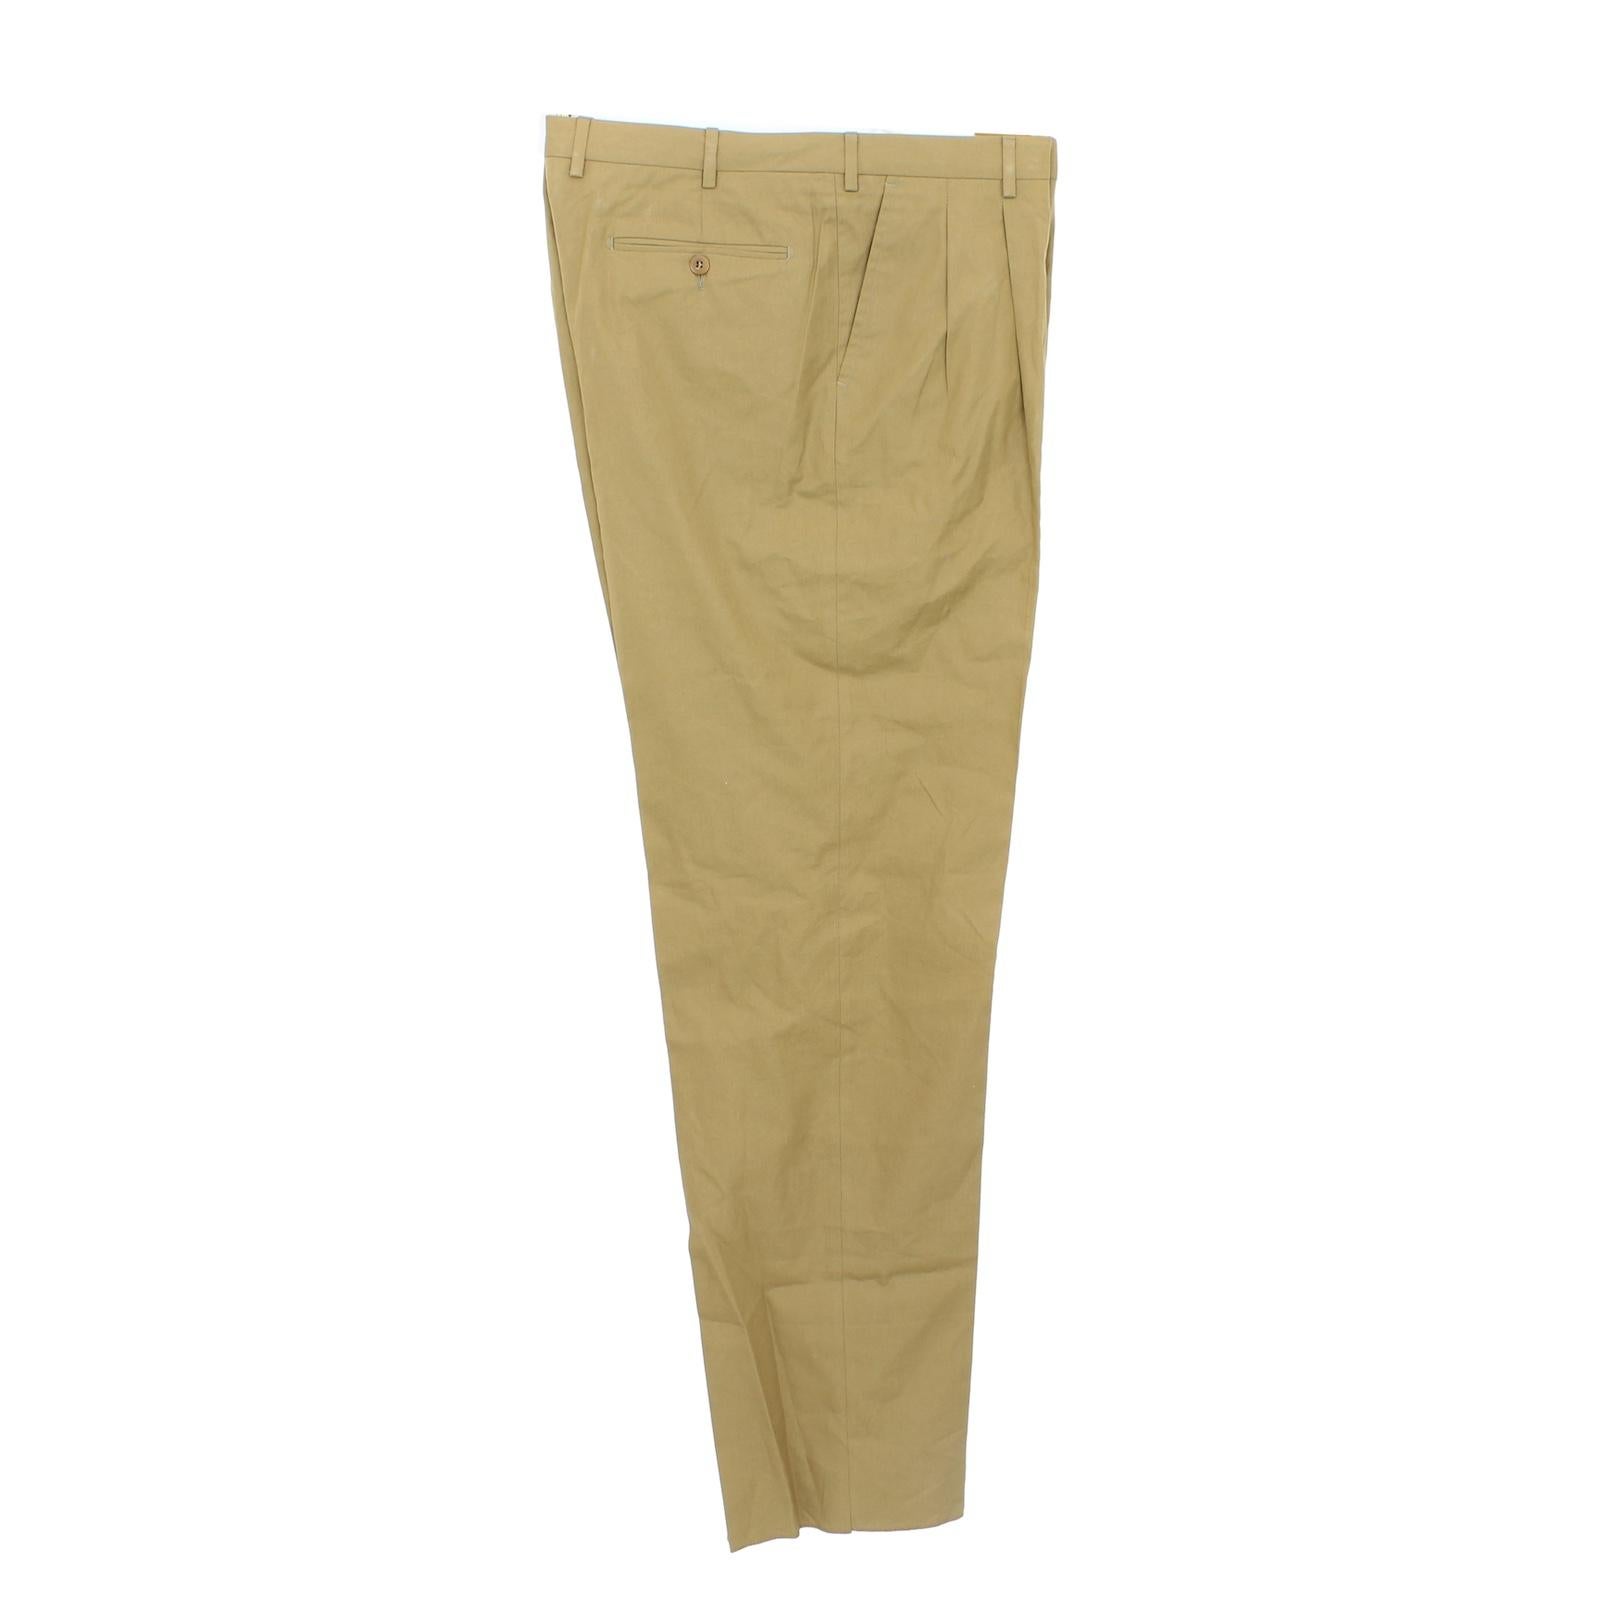 Burberry vintage 90s trousers. Classic model, beige color, 100% cotton fabric. Made in italy. New from warehouse stock.

Size: 56 It 46 Us 46 Uk

Waist: 48 cm
Length: 122 cm
Hem: 21 cm
Inseam length: 95 cm